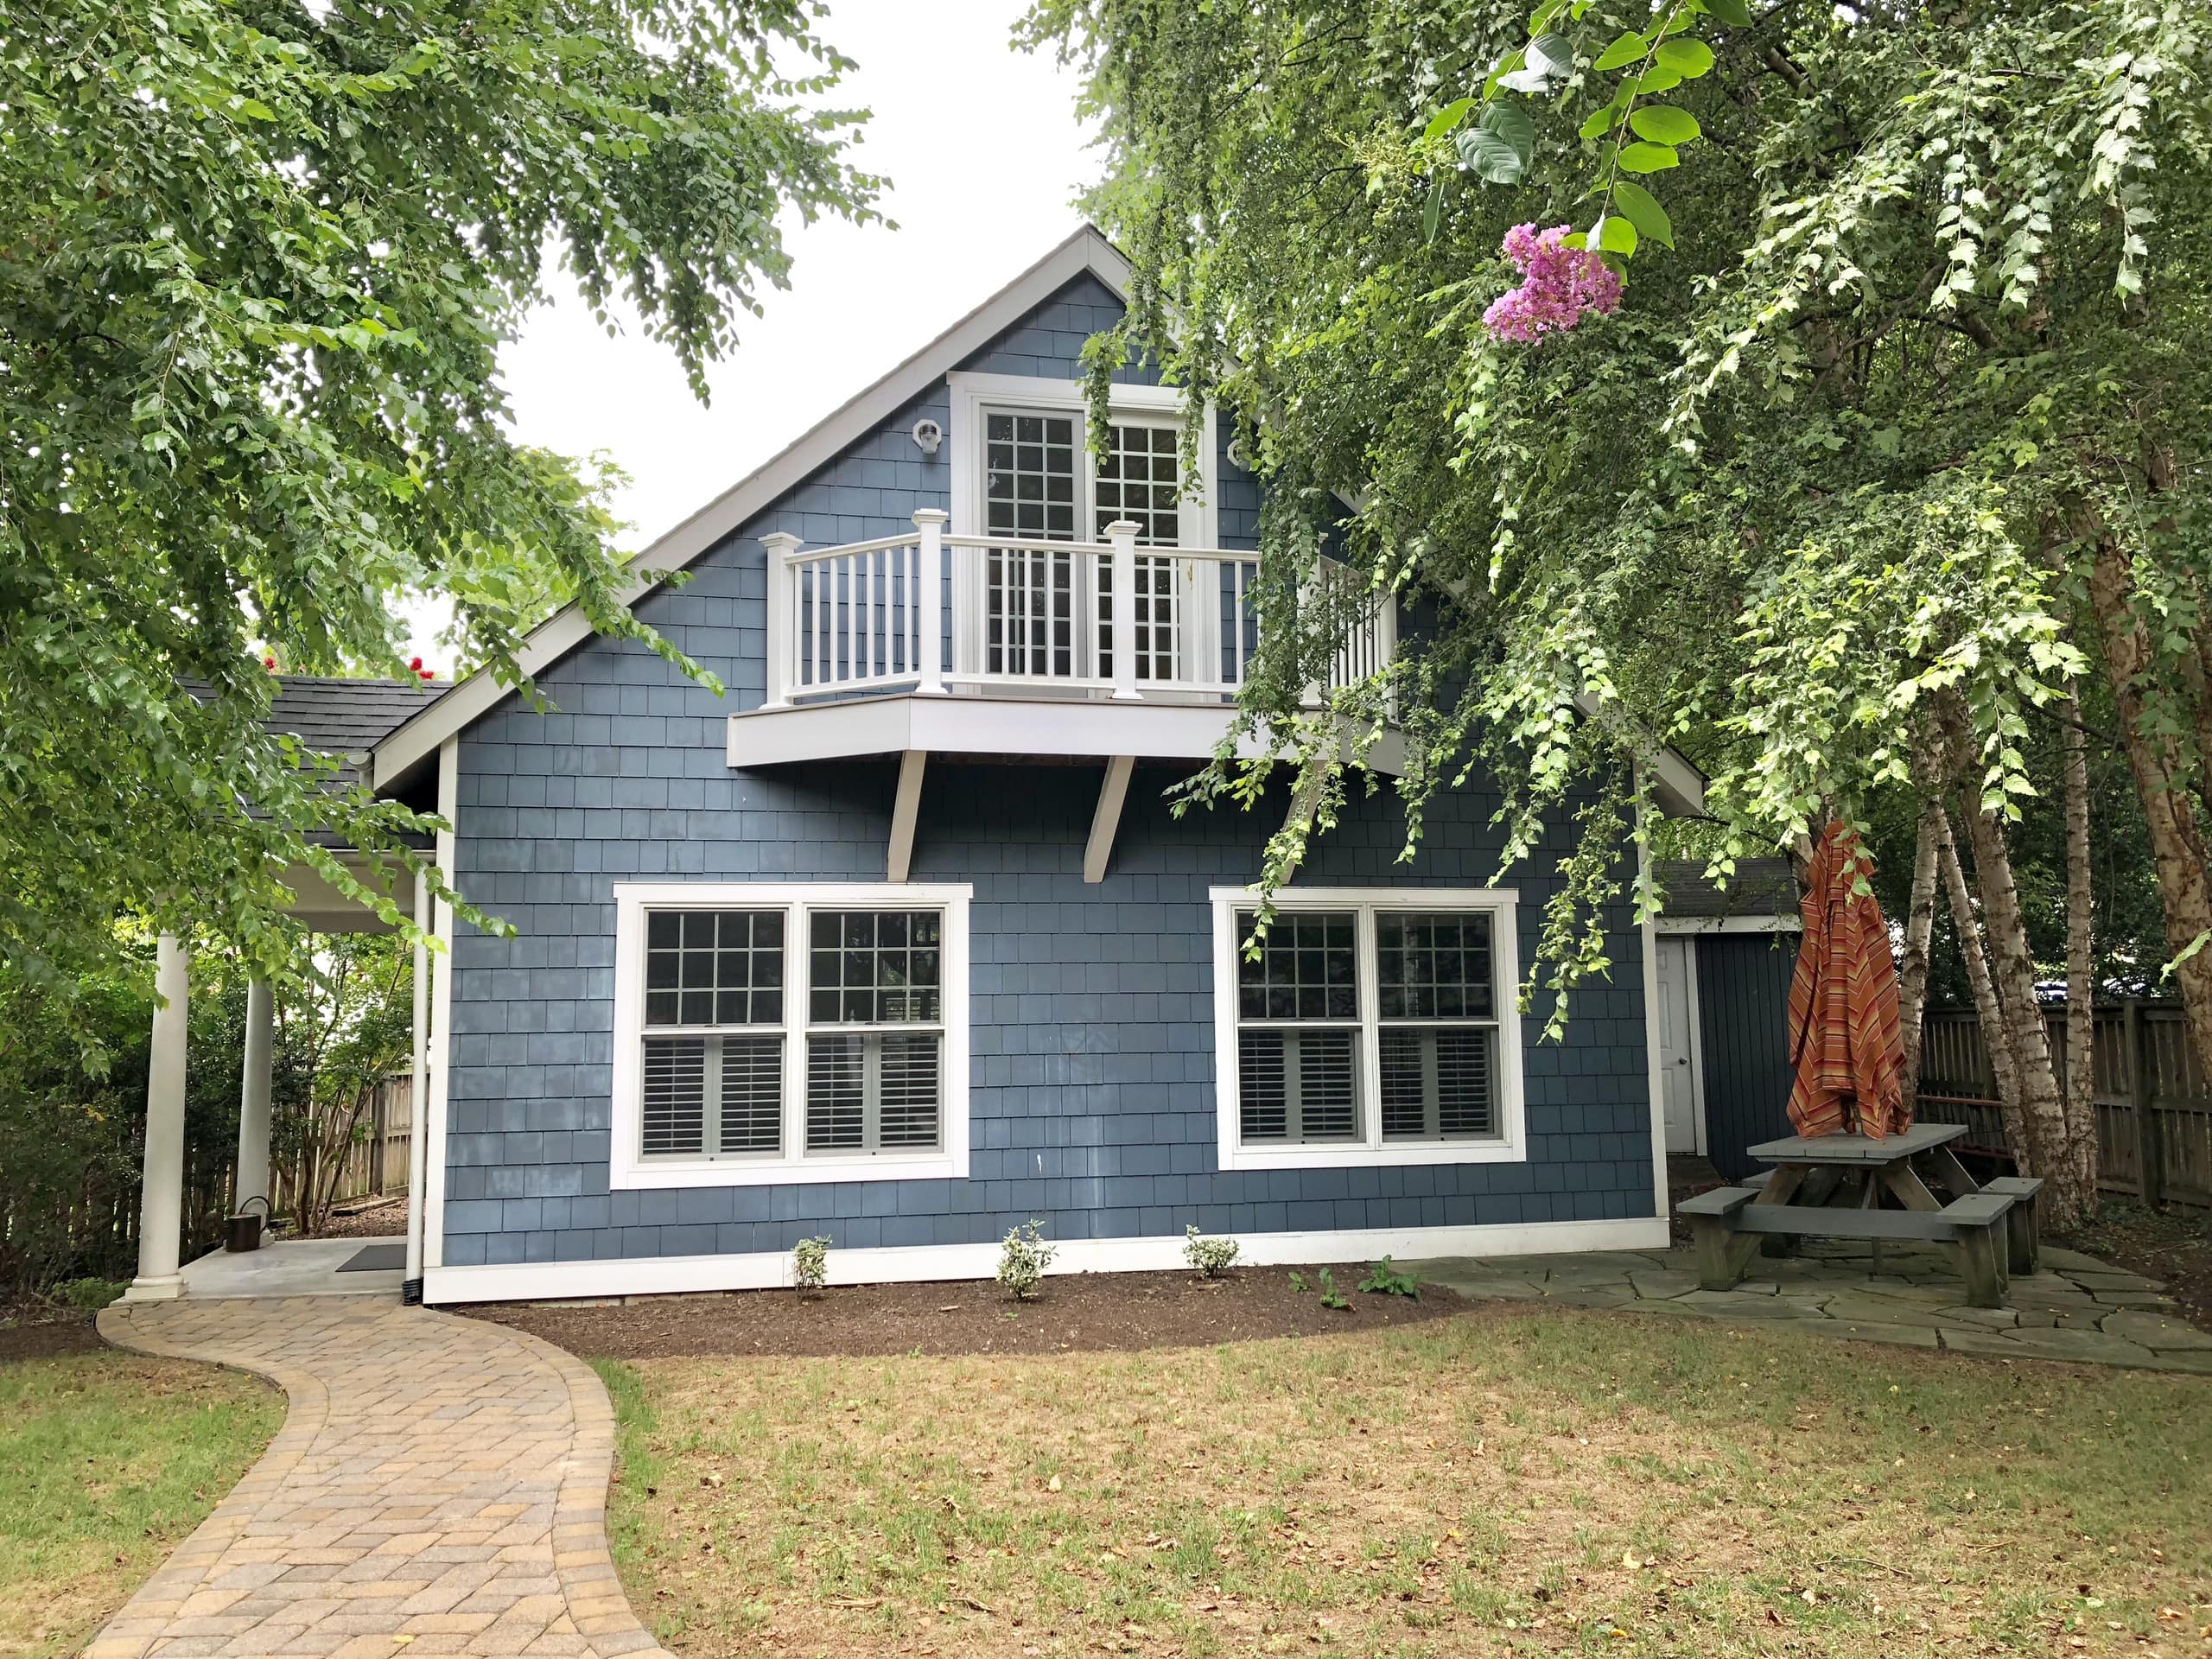 A blue-painted cottage has a winding walking path leading to its porch